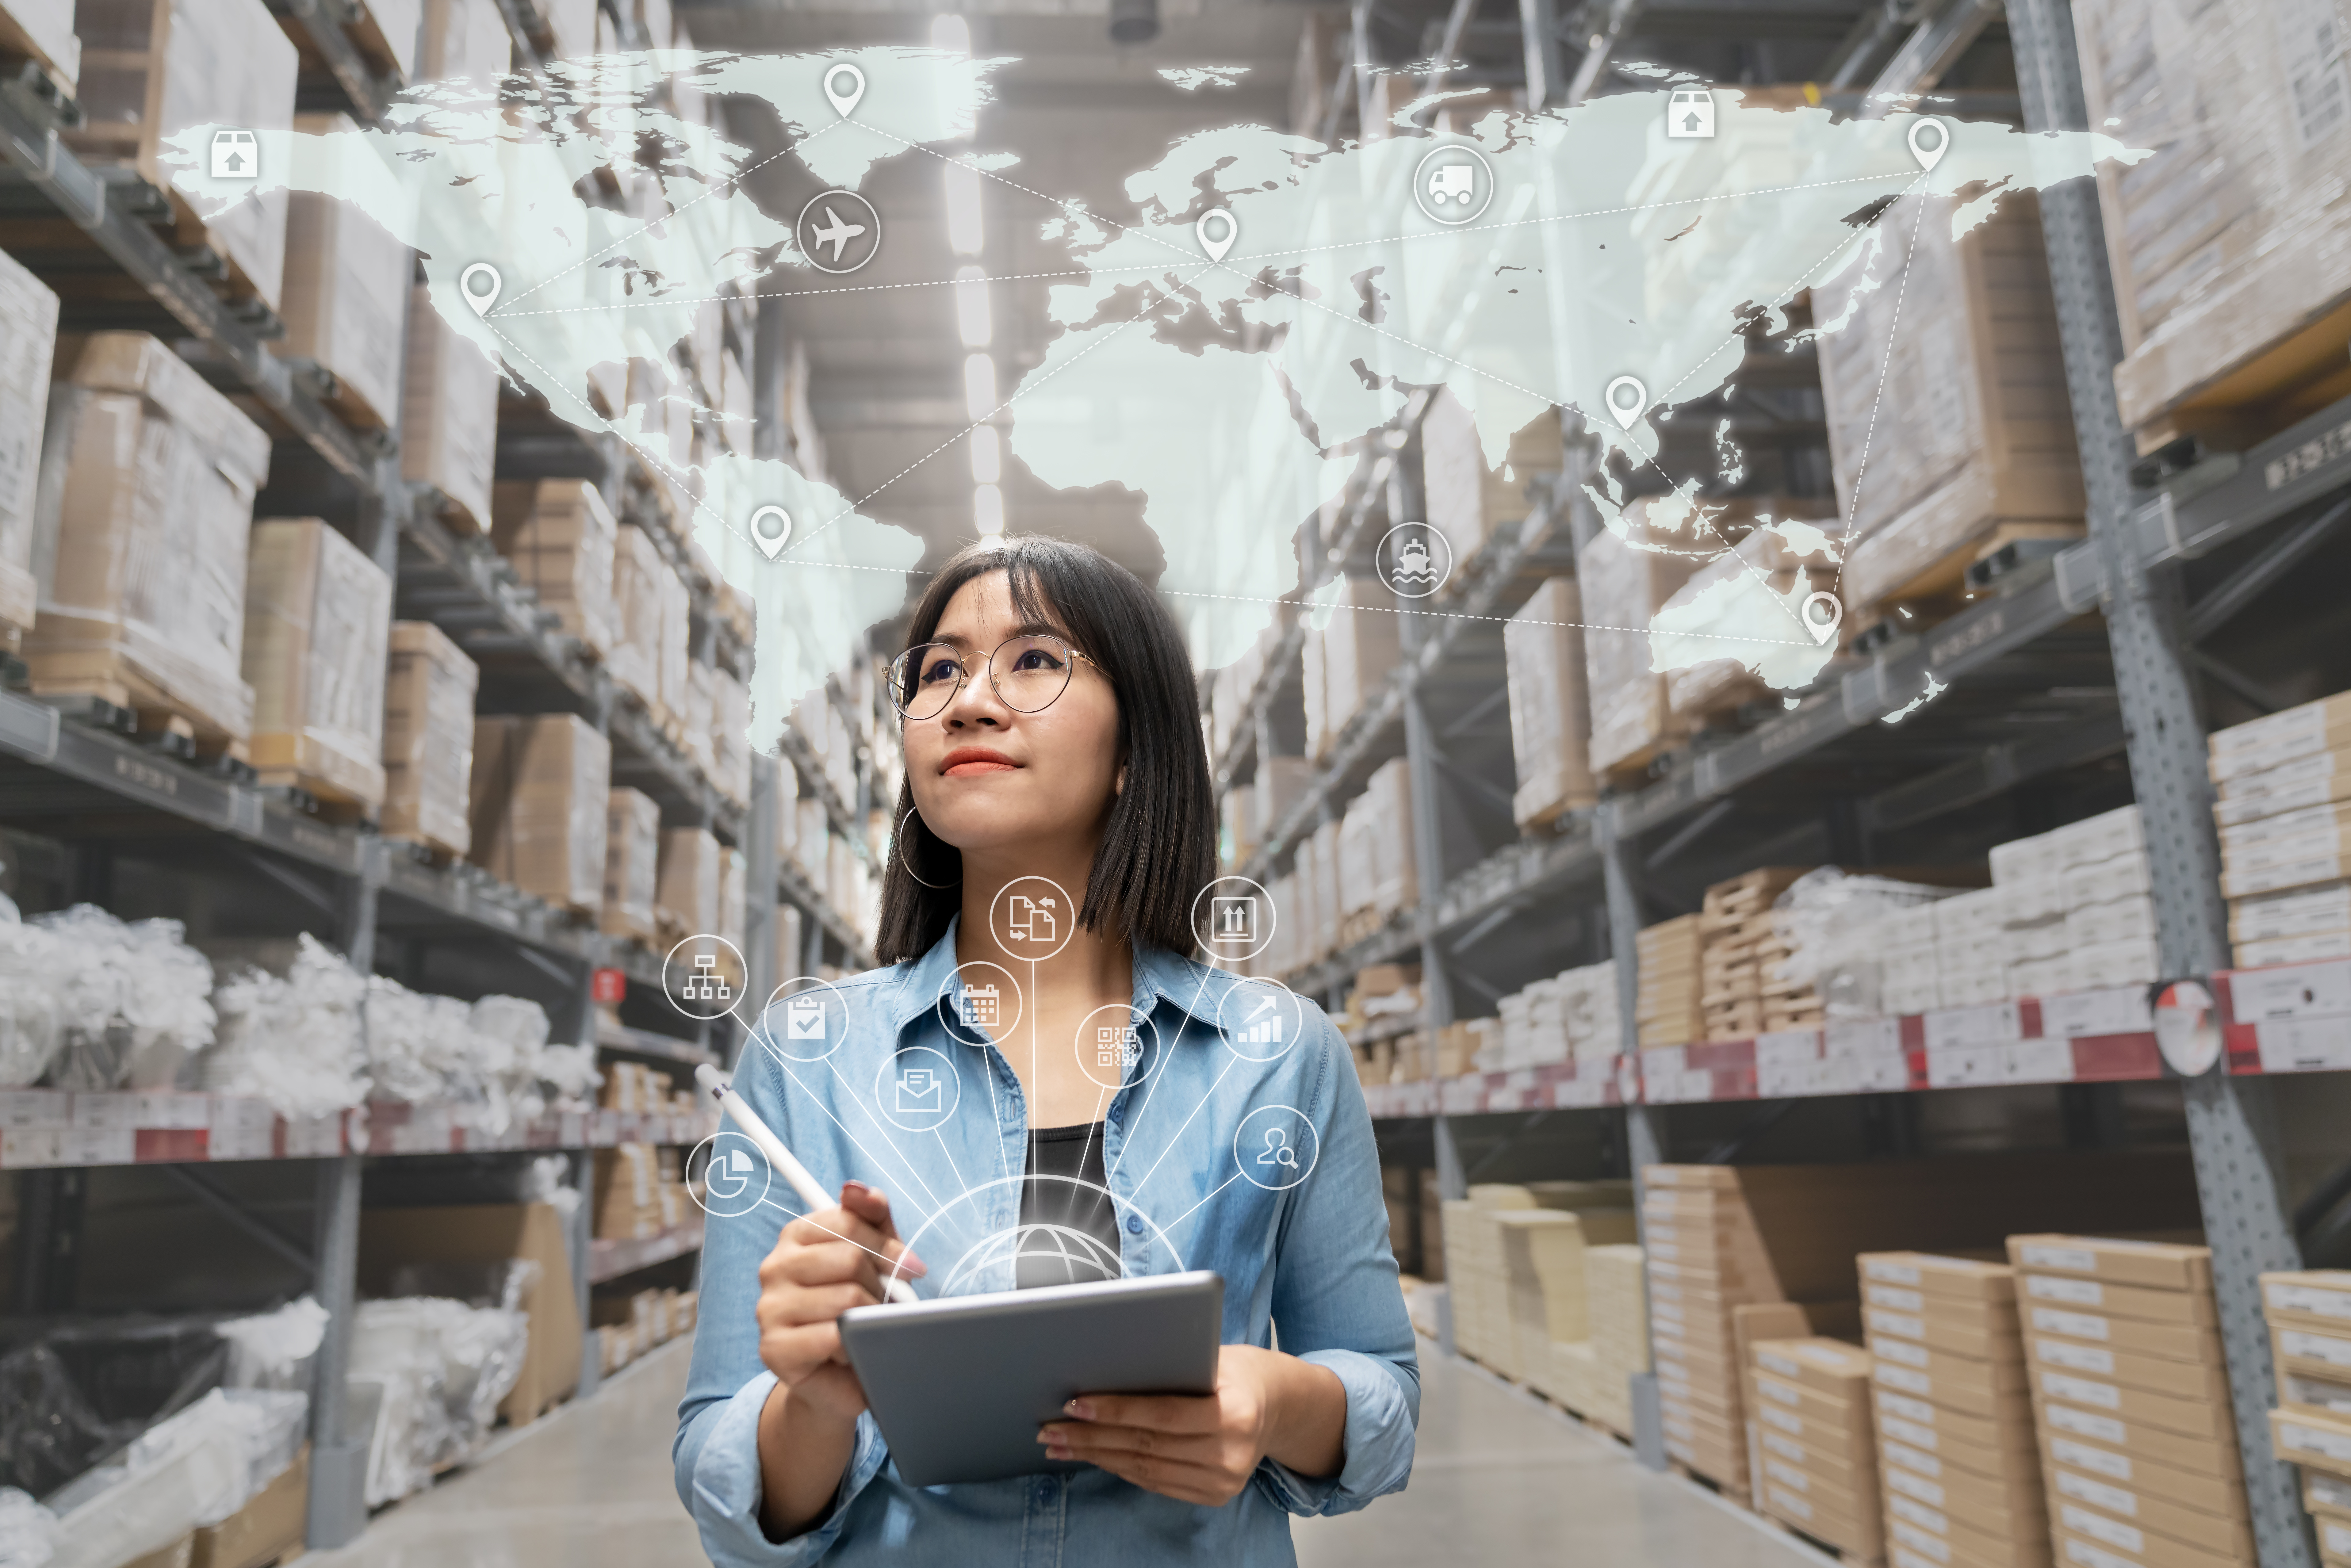 Women: The Future of the Supply Chain